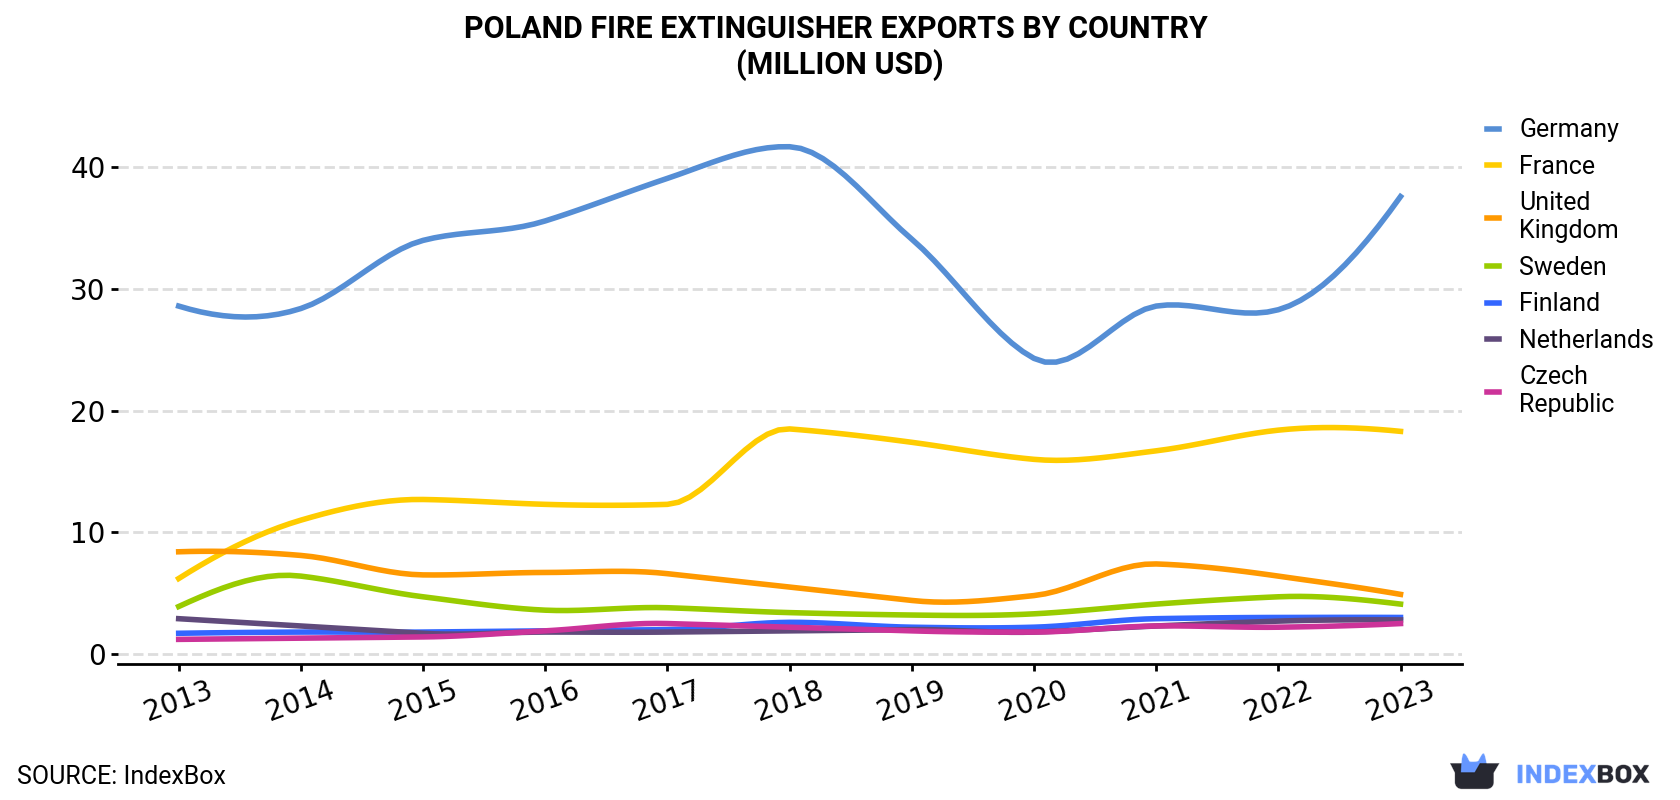 Poland Fire Extinguisher Exports By Country (Million USD)